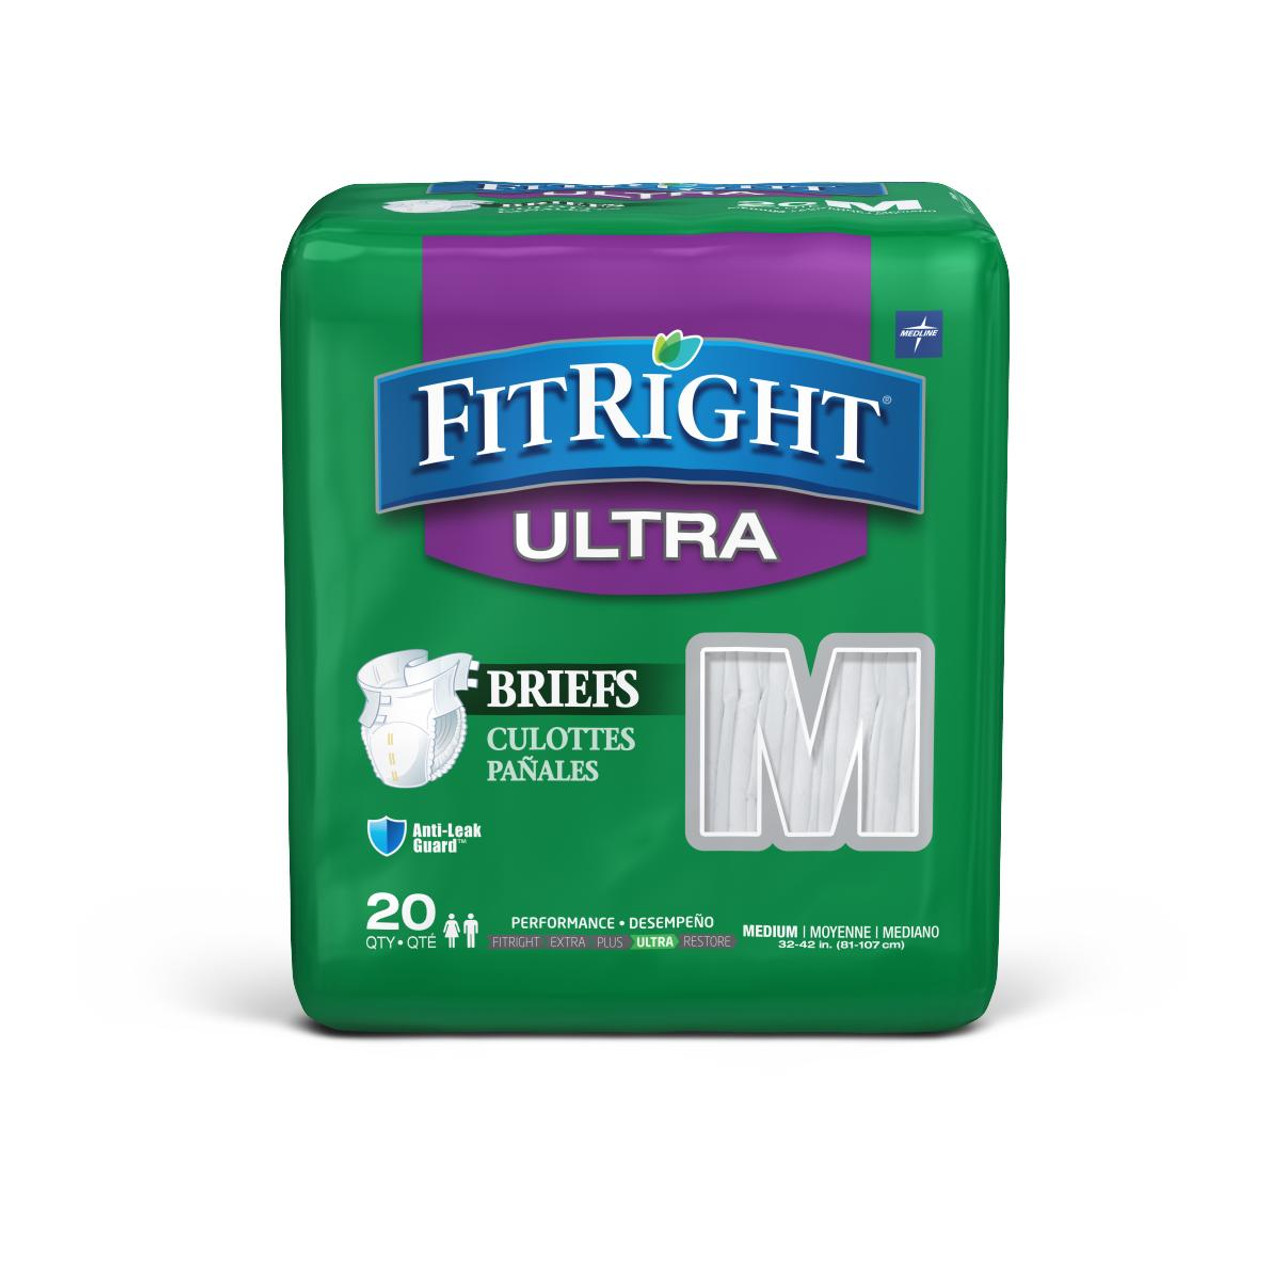 Medline FitRight Ultra Adult Incontinence Briefs